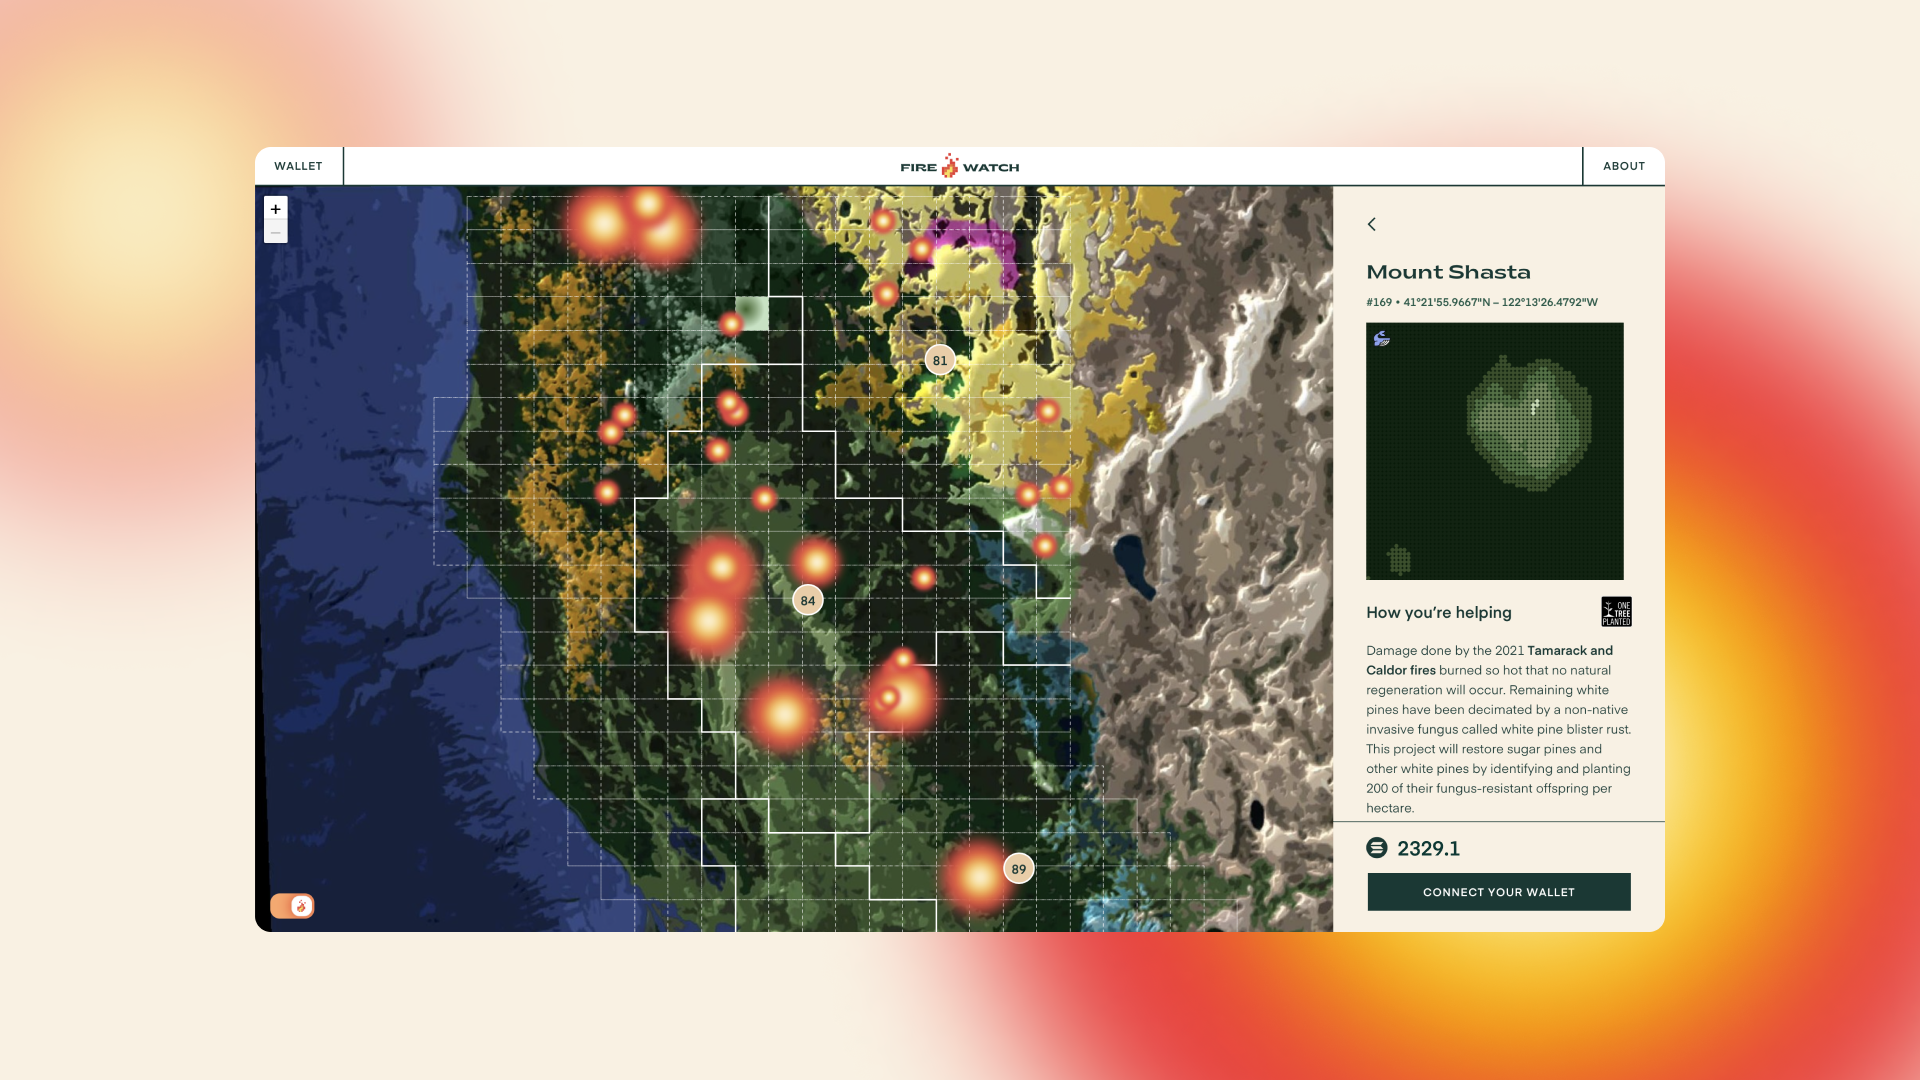 YML Launches FIREWATCH, Solana-Based Wildfire Project Employs NFTs to Save California